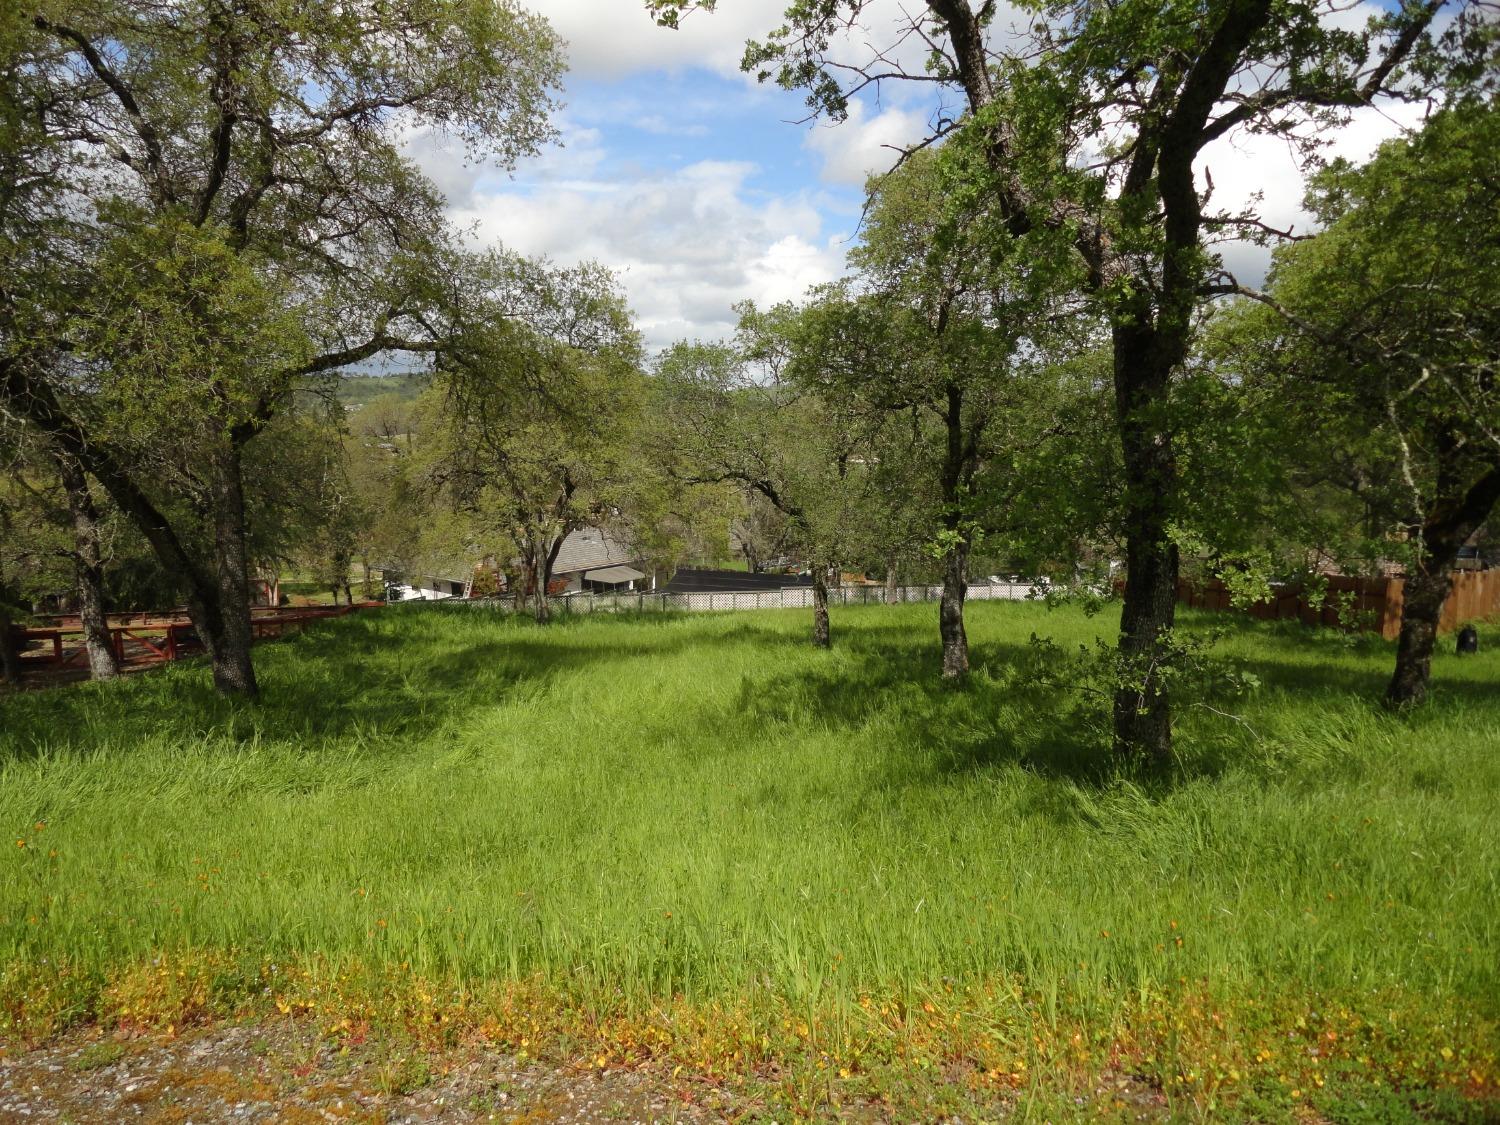 a view of grassy field